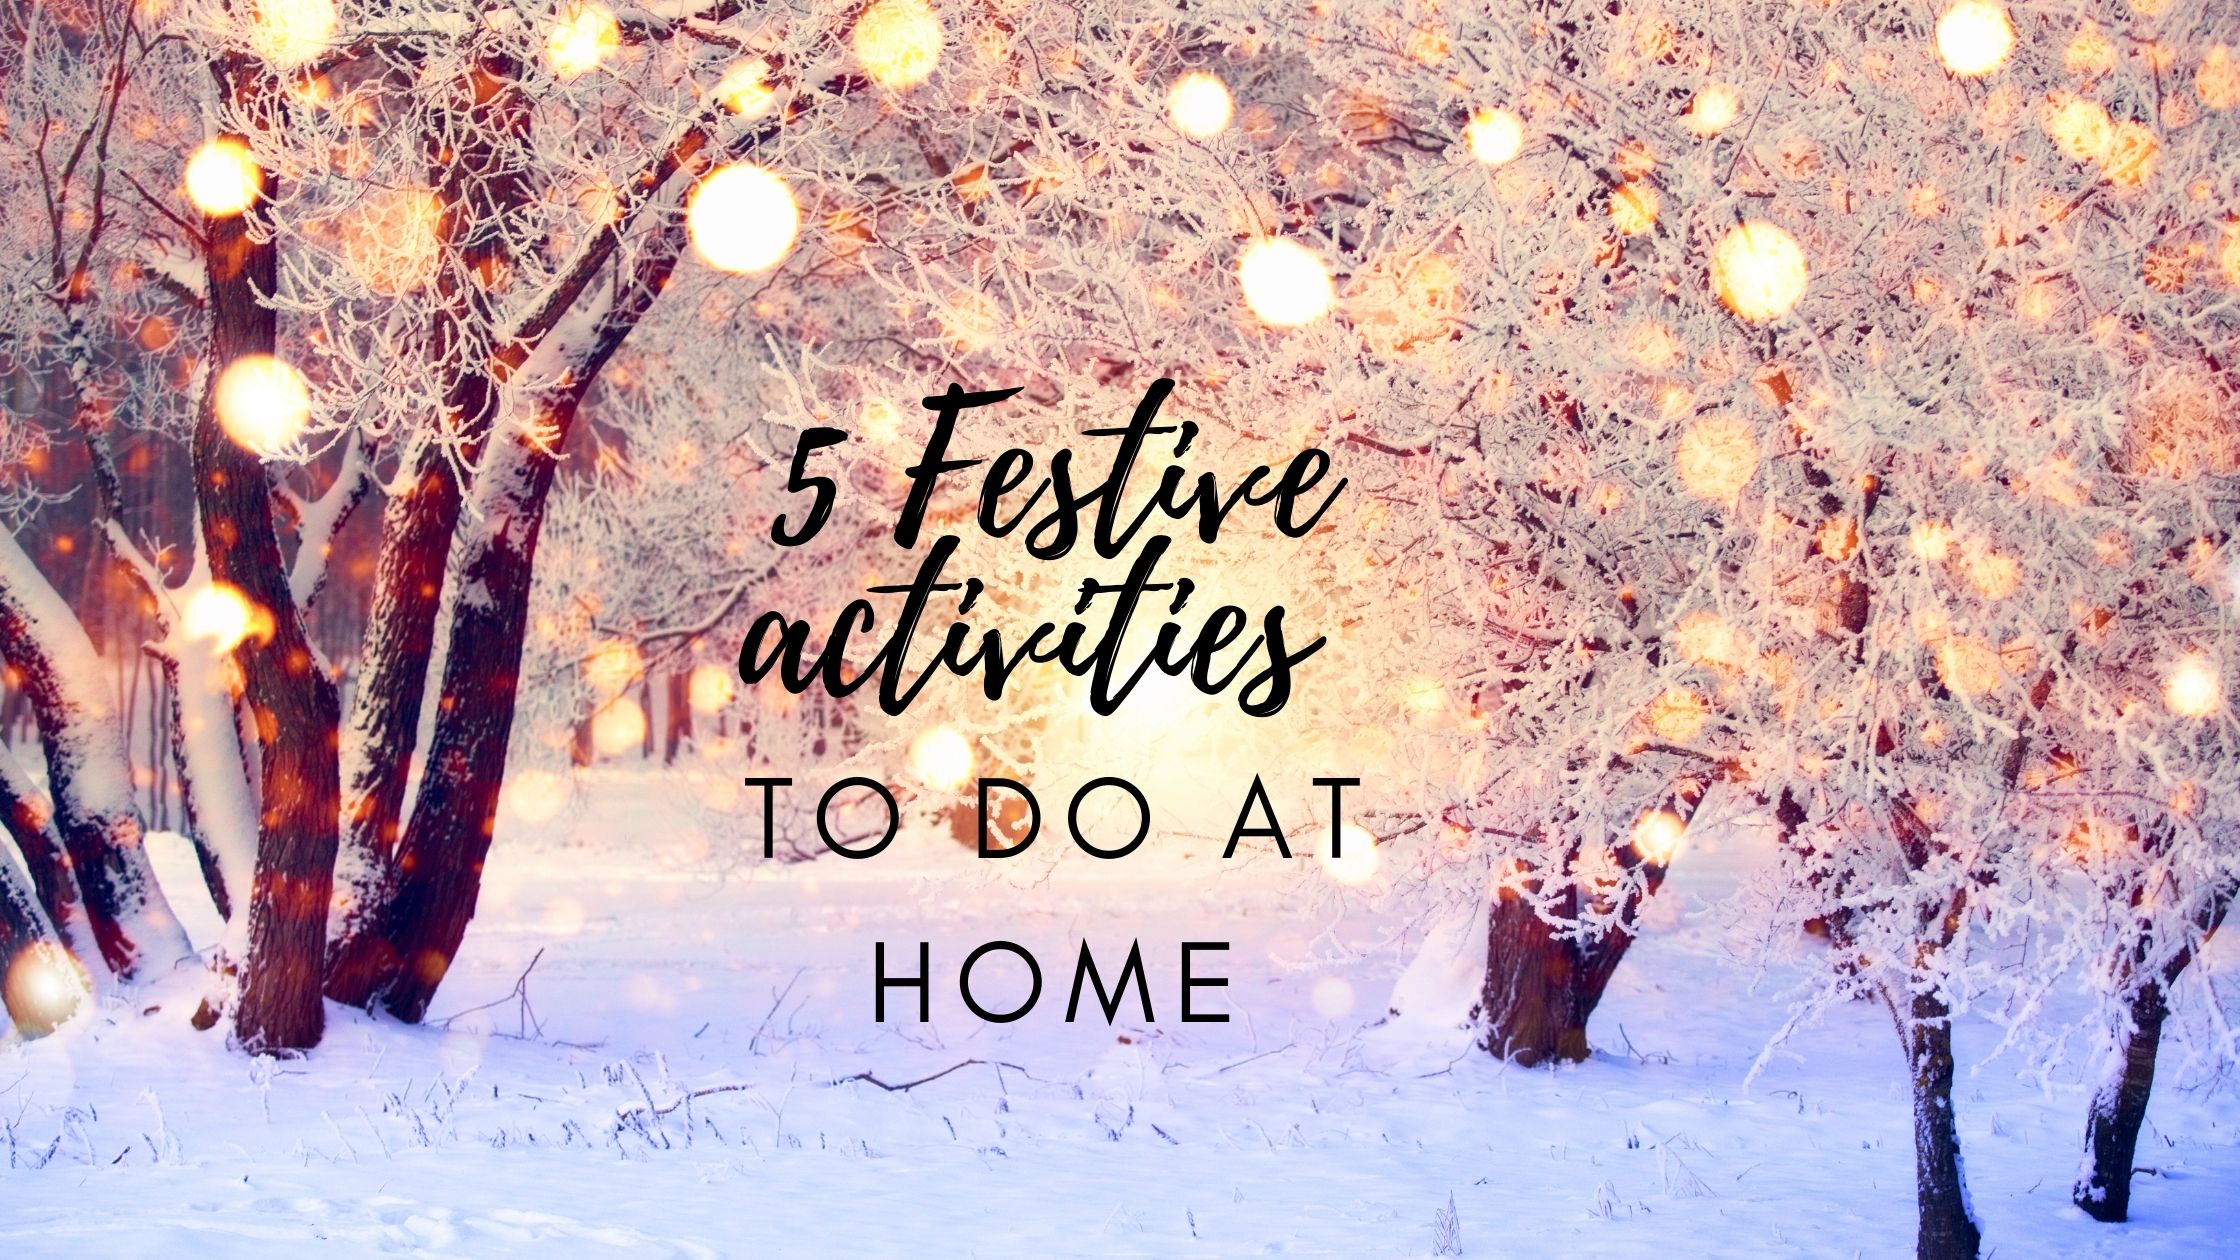 Festive activities to do at home